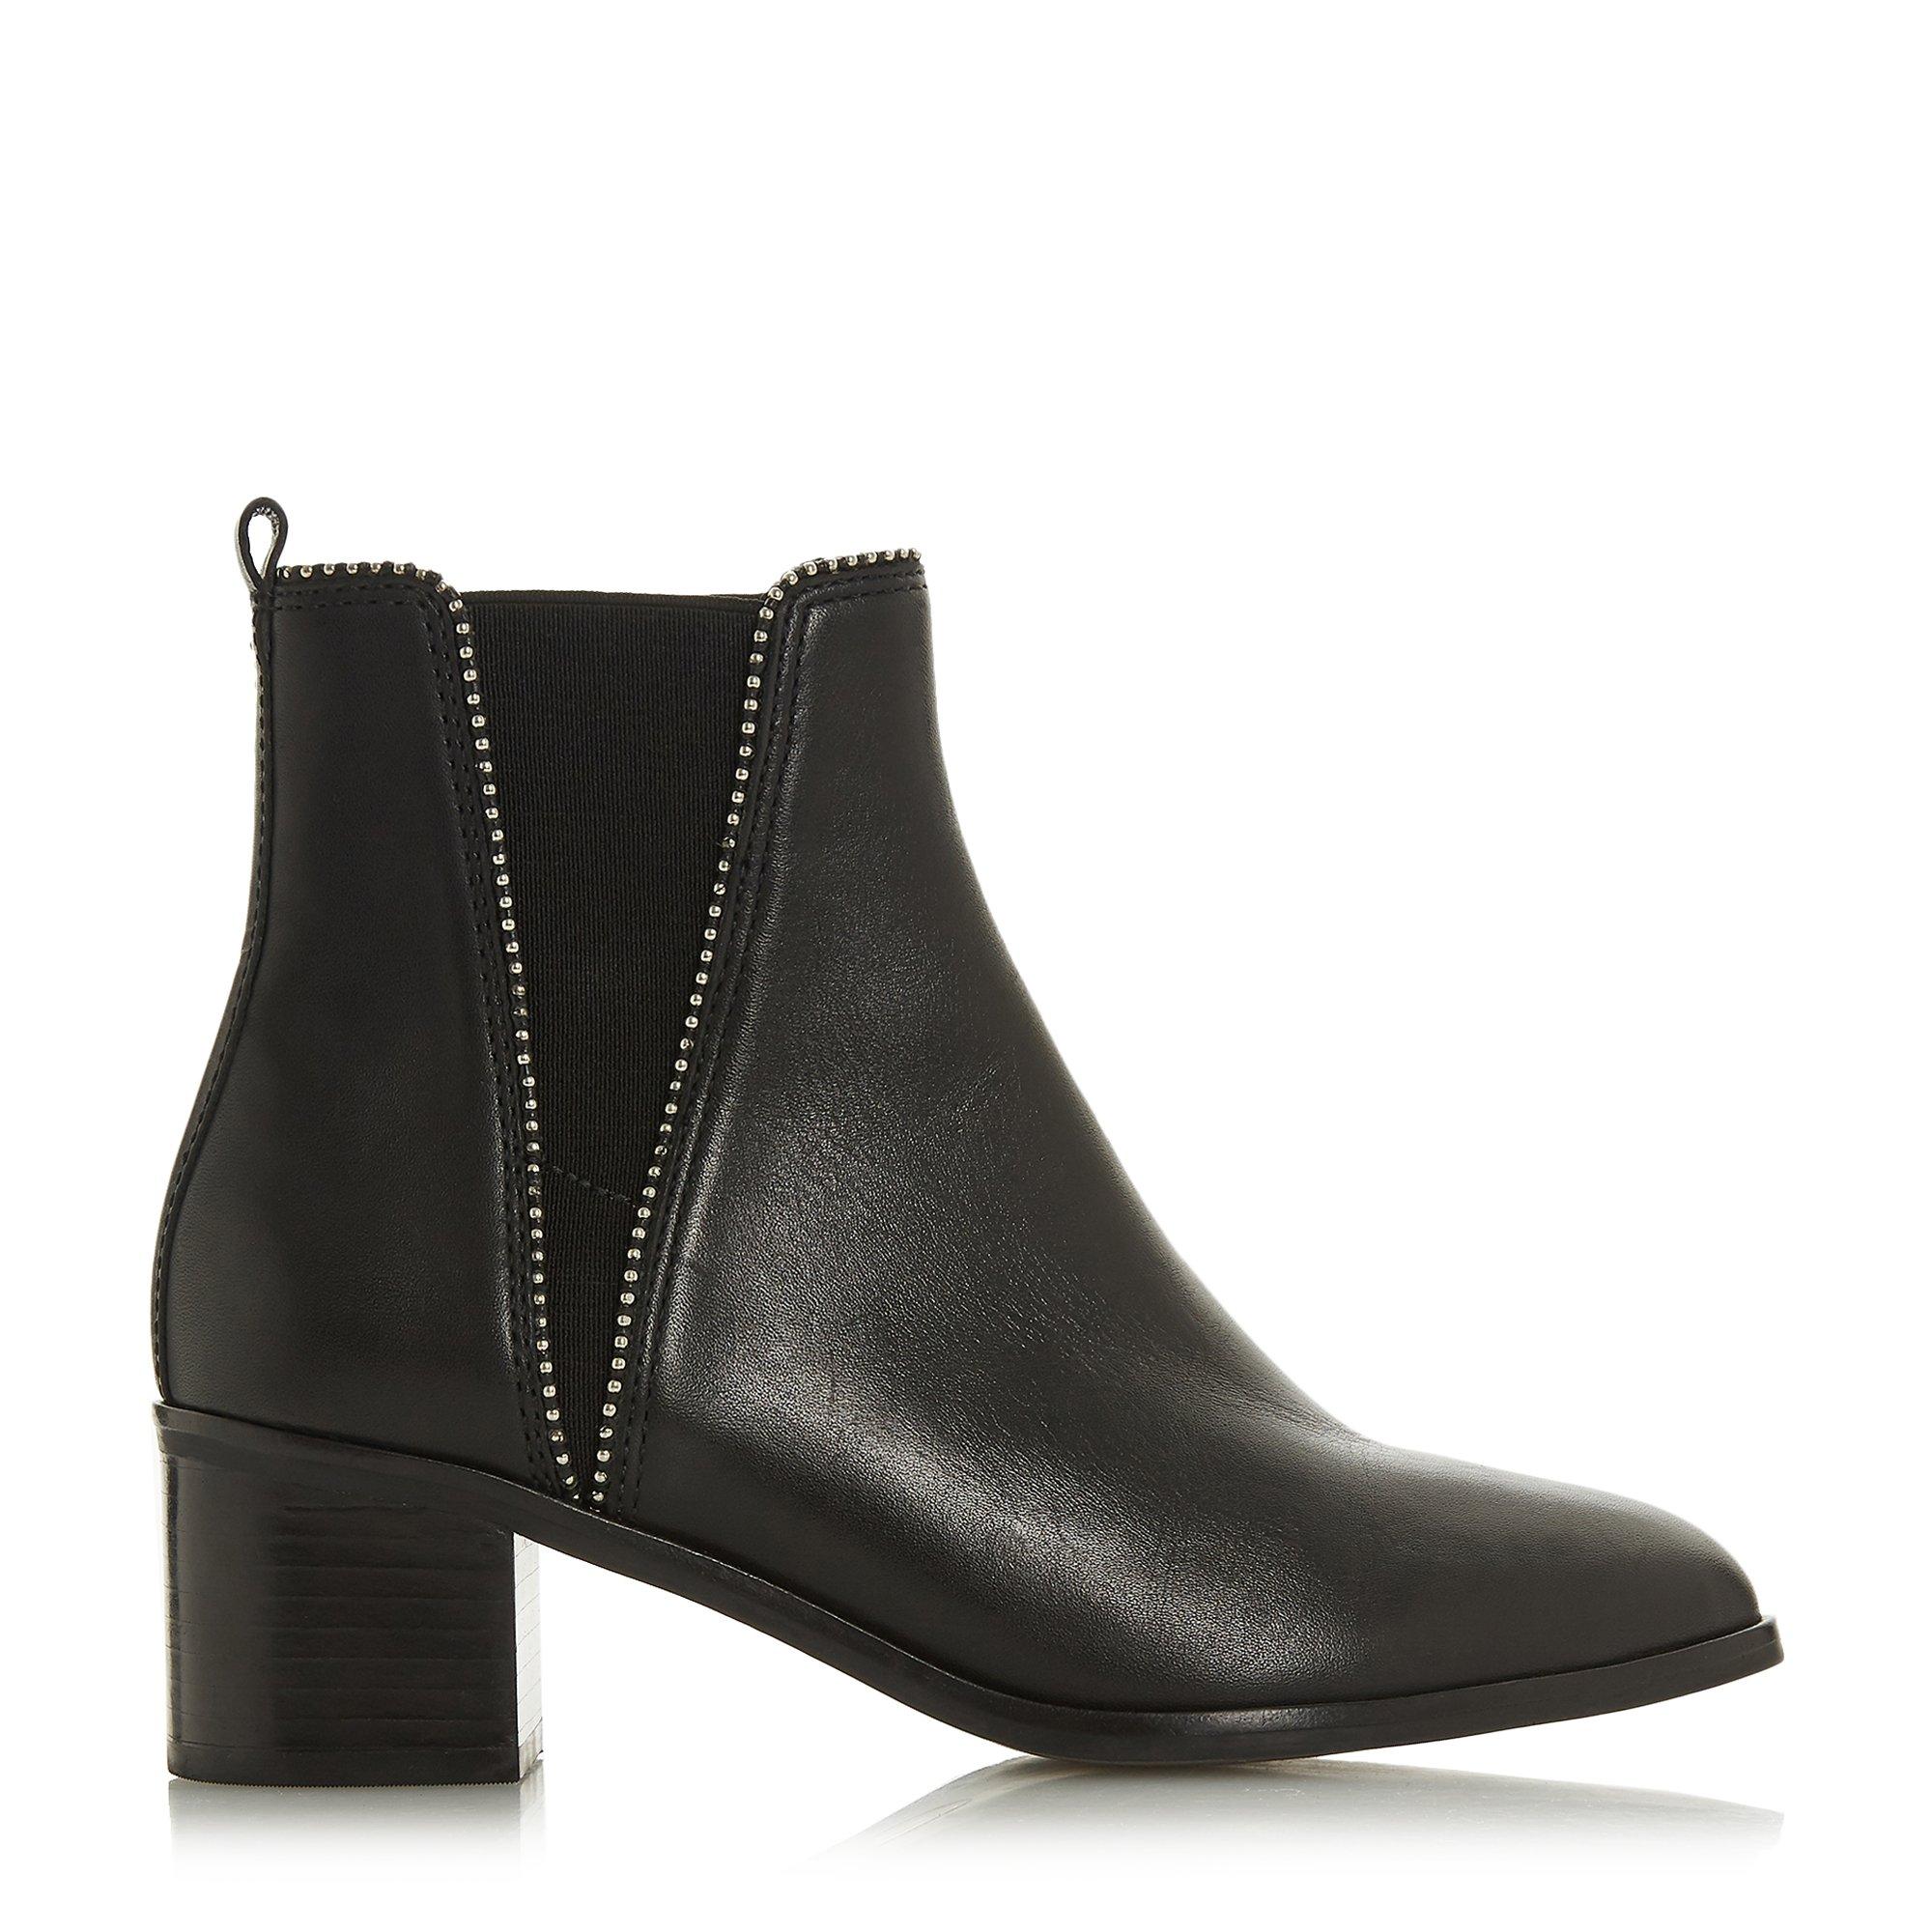 Ladies Ankle Boots - Ankle Boots For Women | Dune London